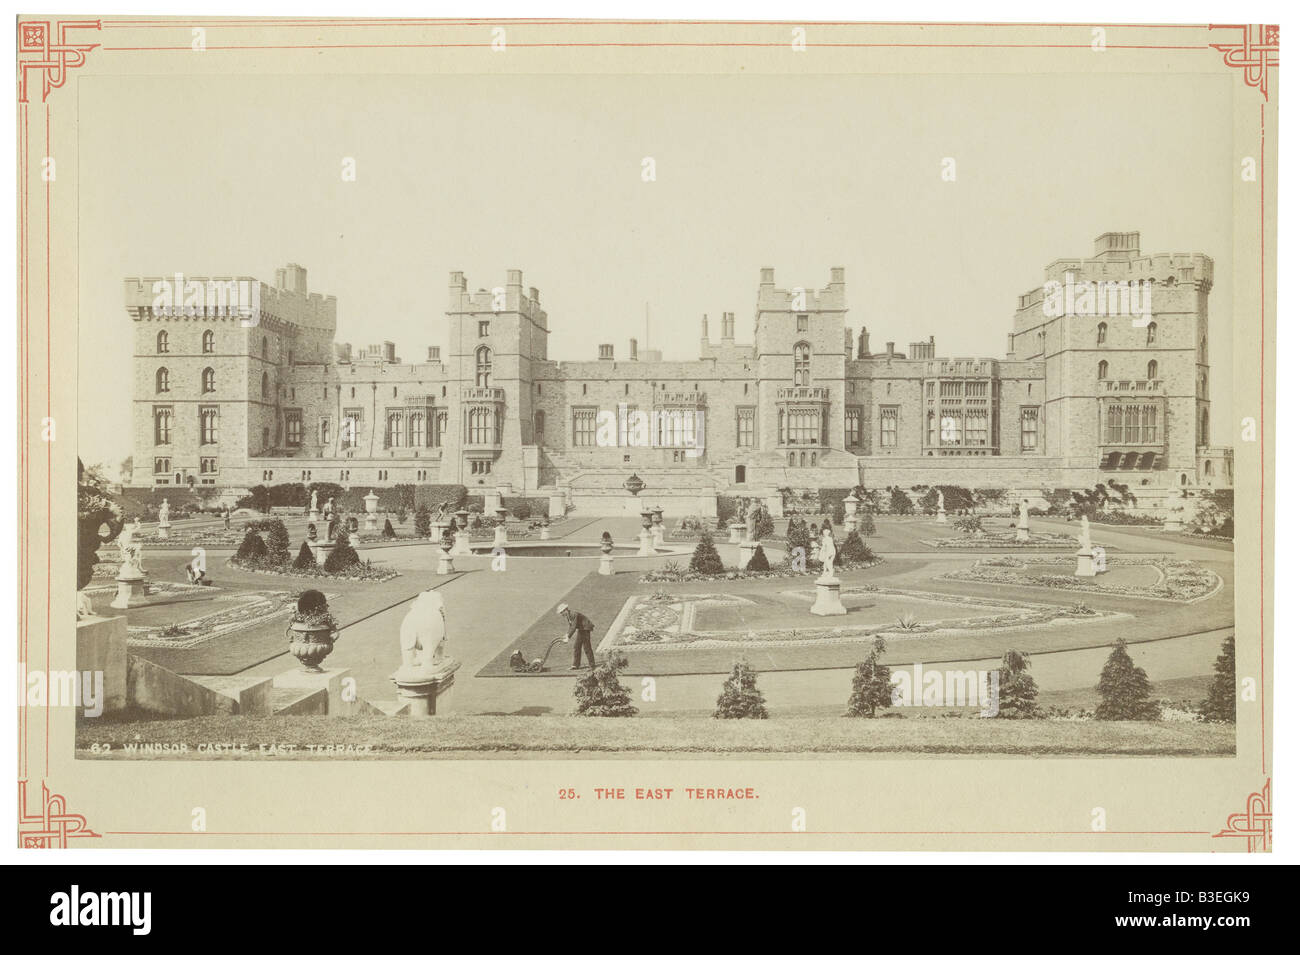 geography/travel, Great Britain, castles, Windsor castle, east terrace, circa 1900, Stock Photo